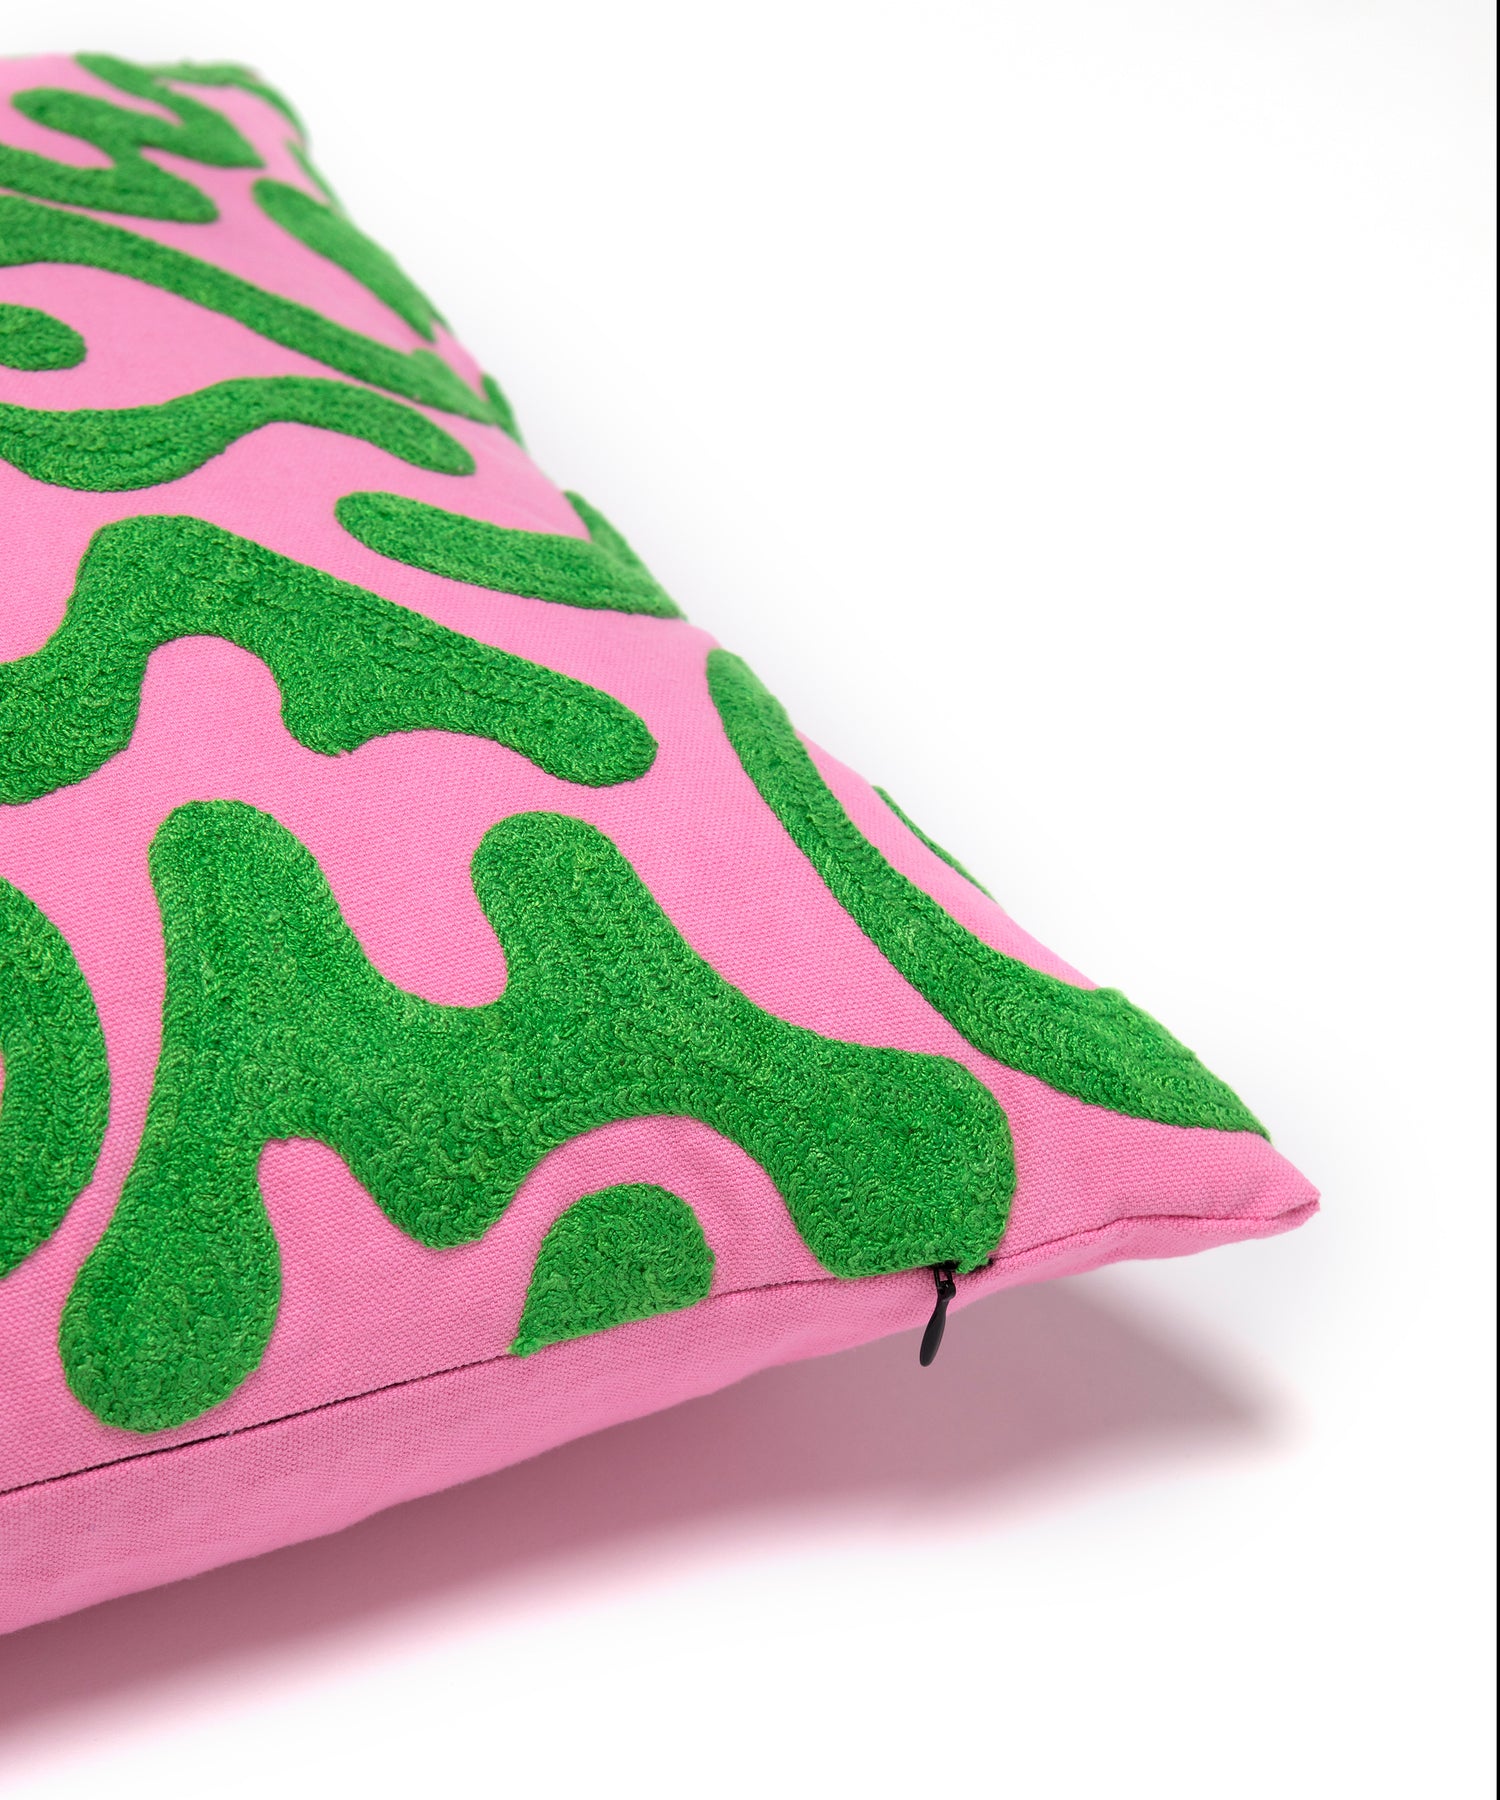 Corner detail of silly squiggle pillow showing green squiggle shapes on it's pink background also showing the zipper enclosure.